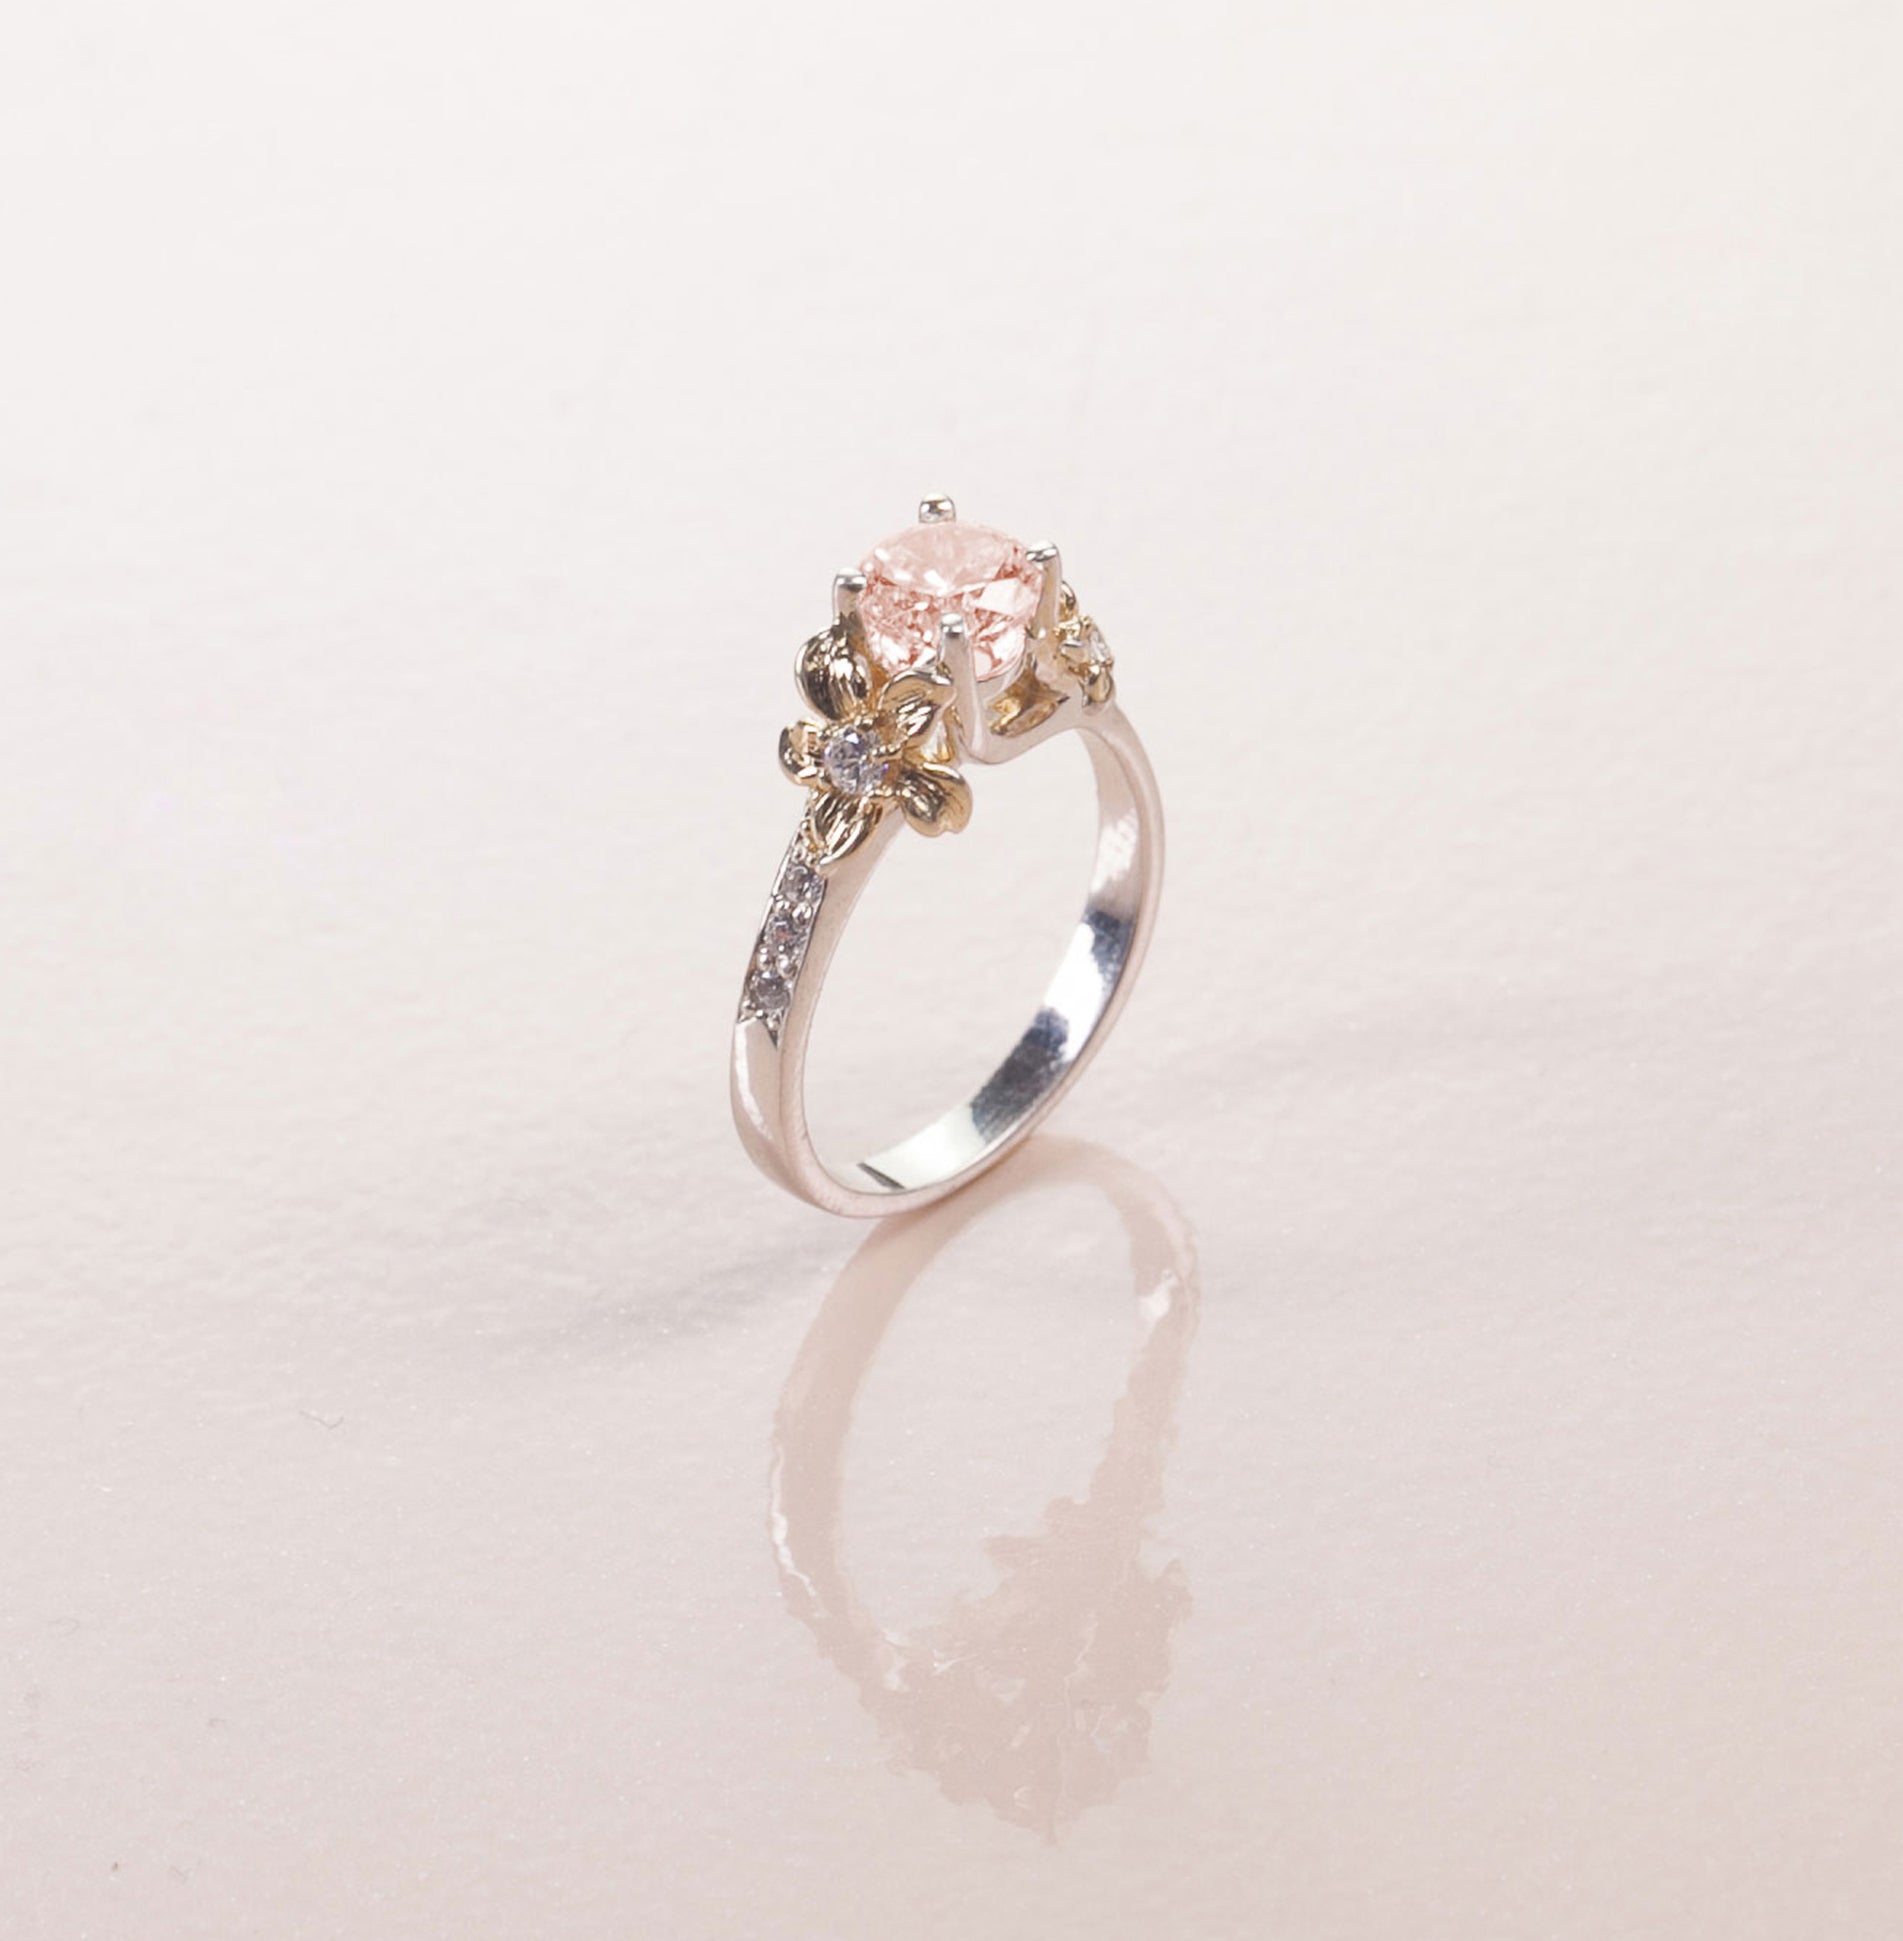 Unique Flower Engagement Ring No.1 White Band/Yellow Flower Gold - Morganite - Roelavi